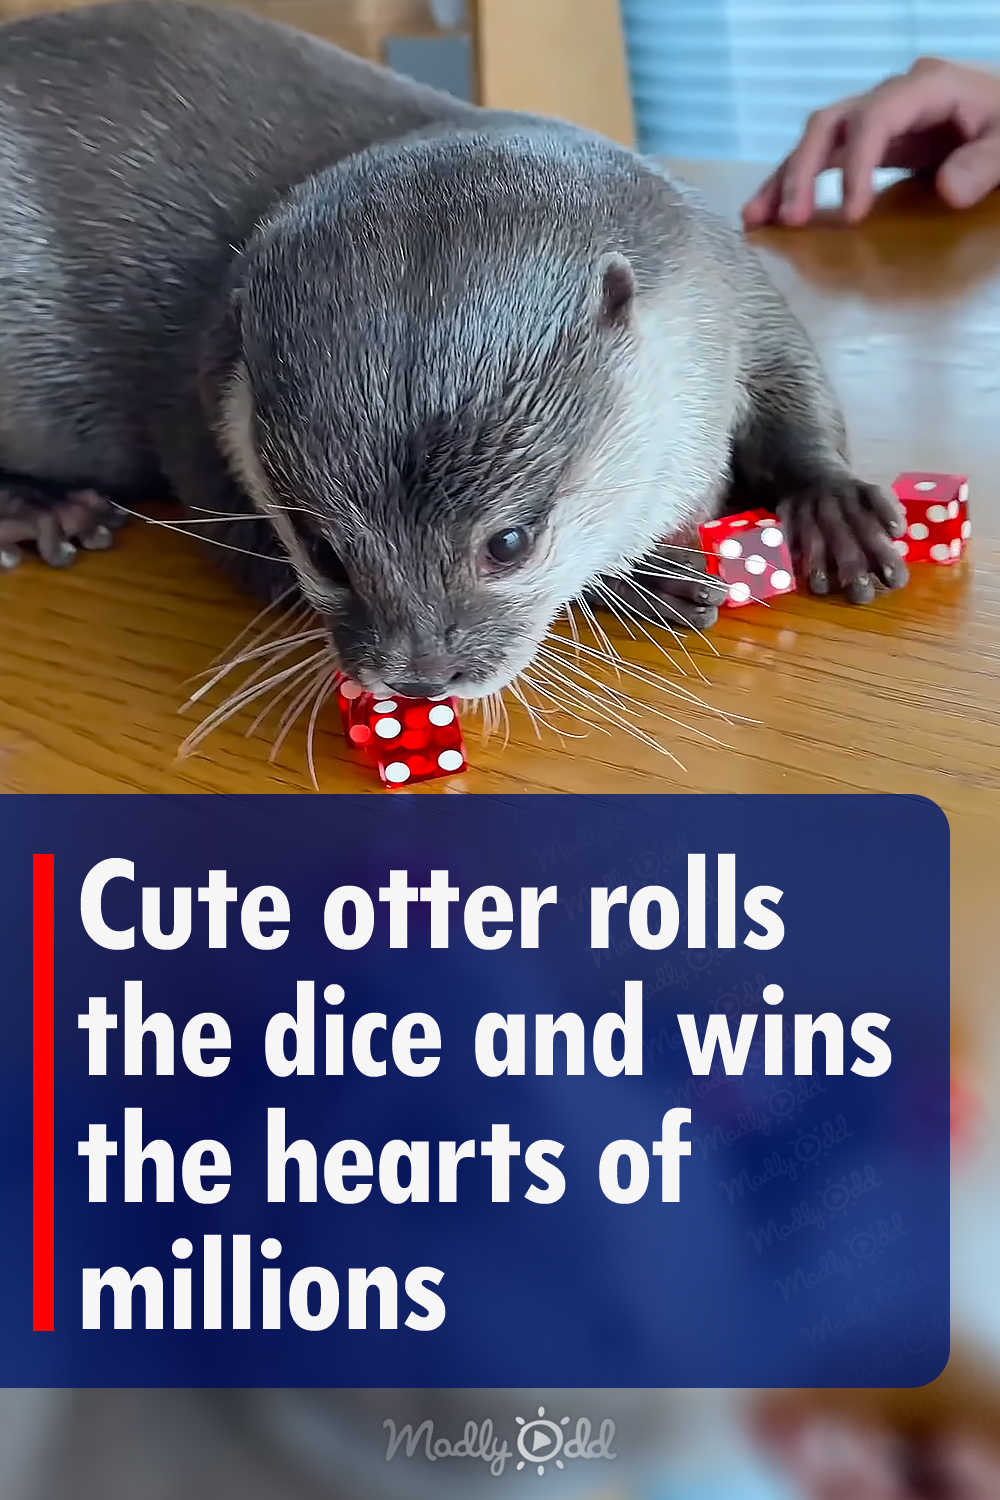 Cute otter rolls the dice and wins the hearts of millions